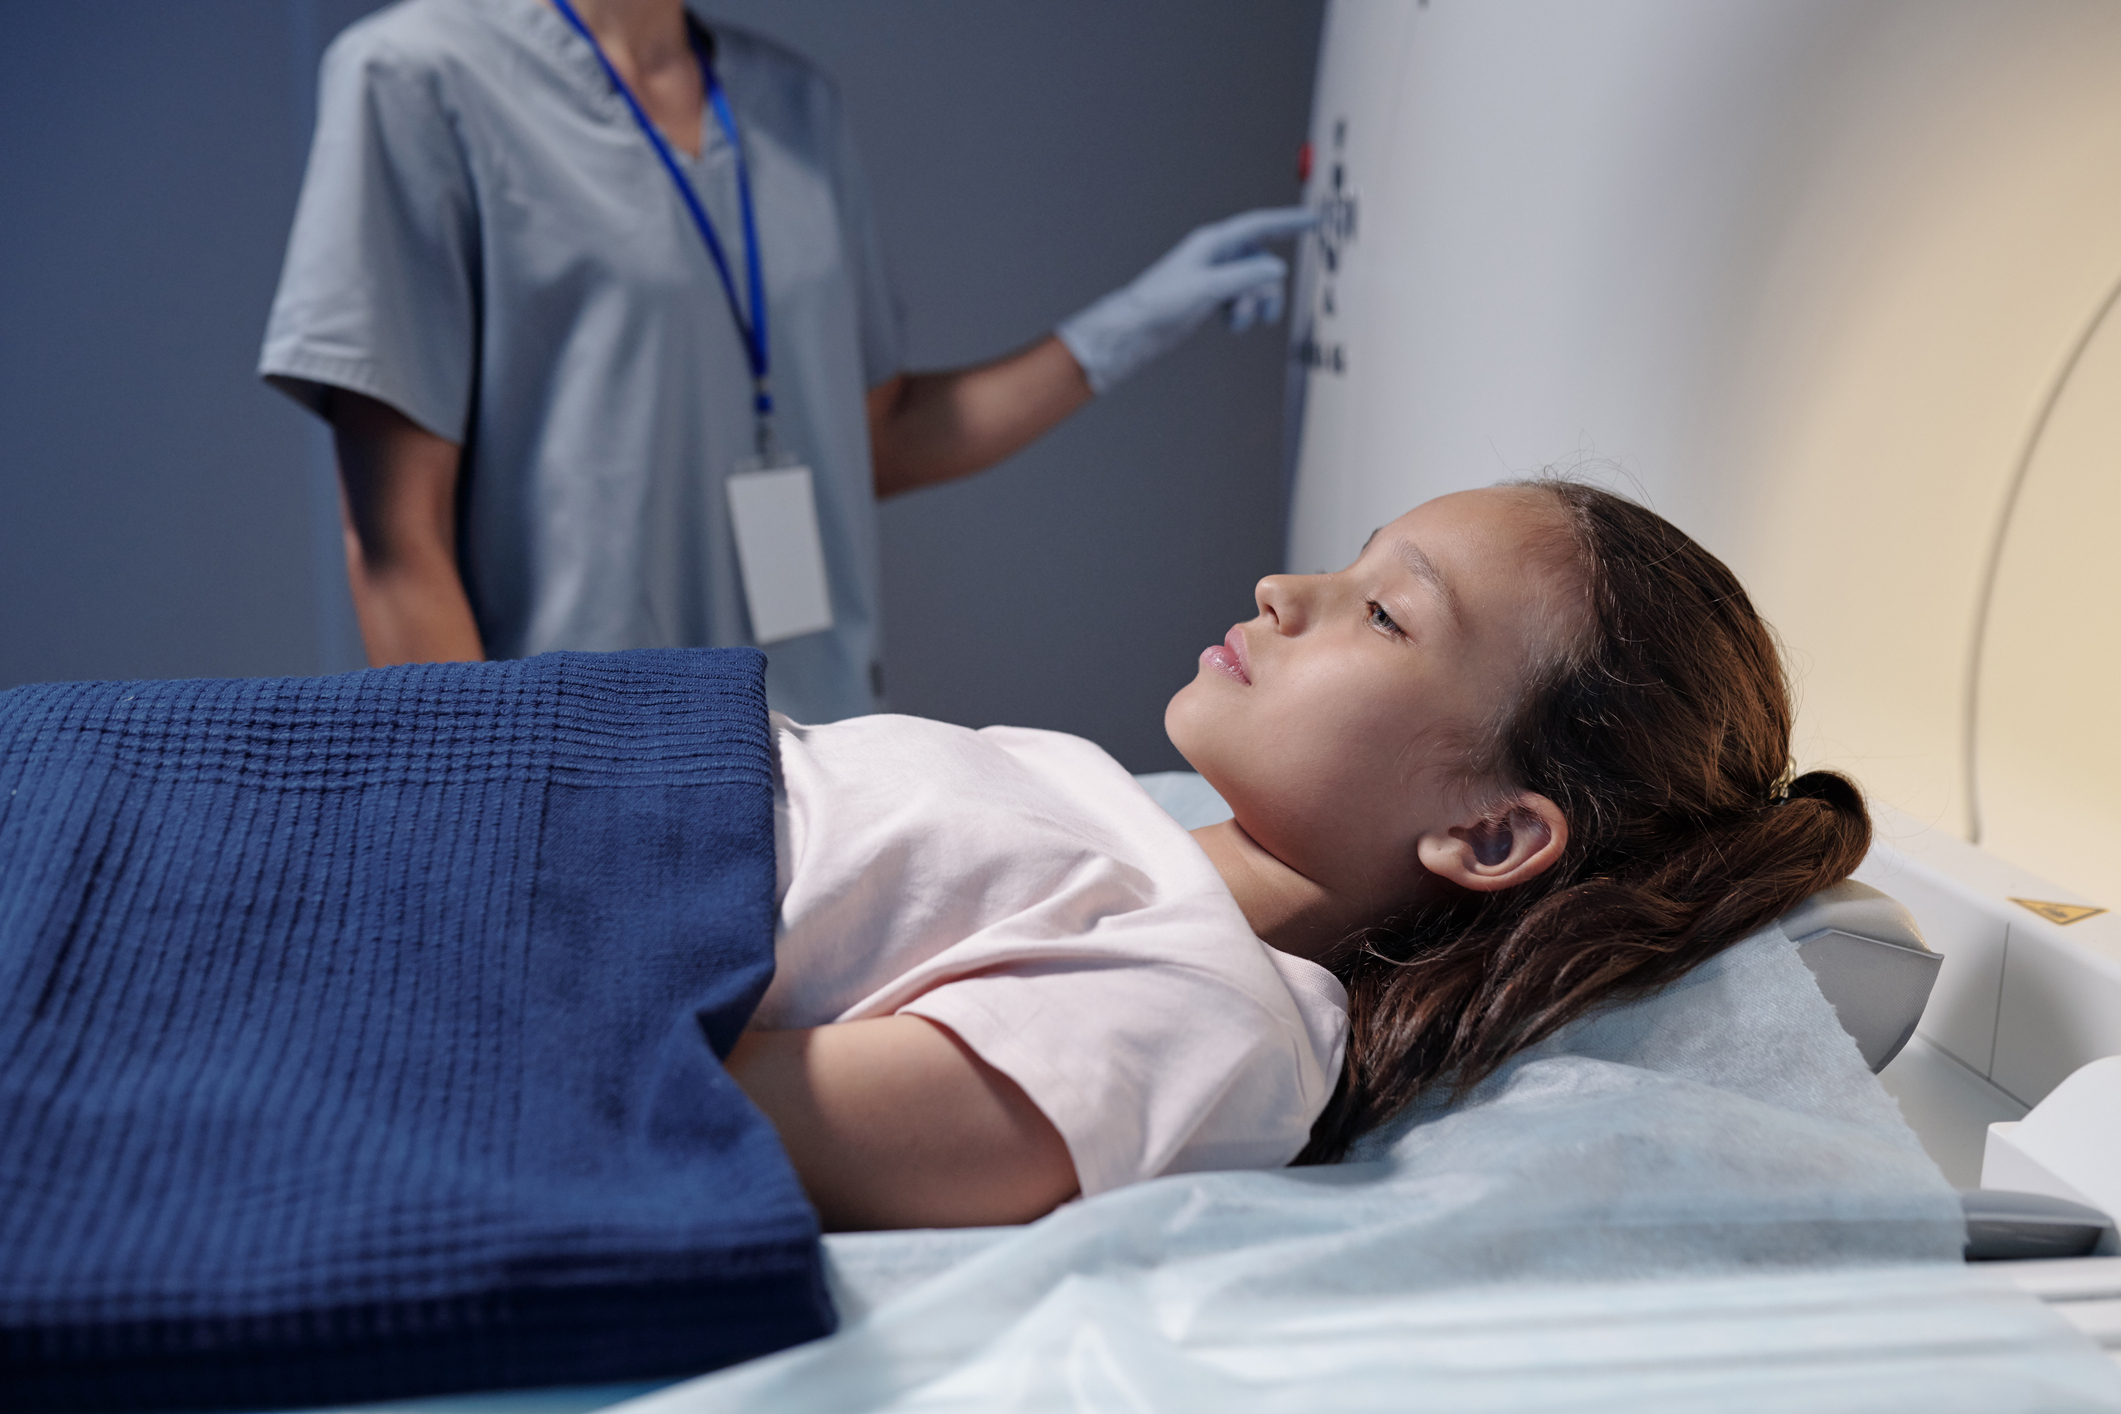 Little girl lying on table of mri scan equipment while gloved assistant pressing start button on panel